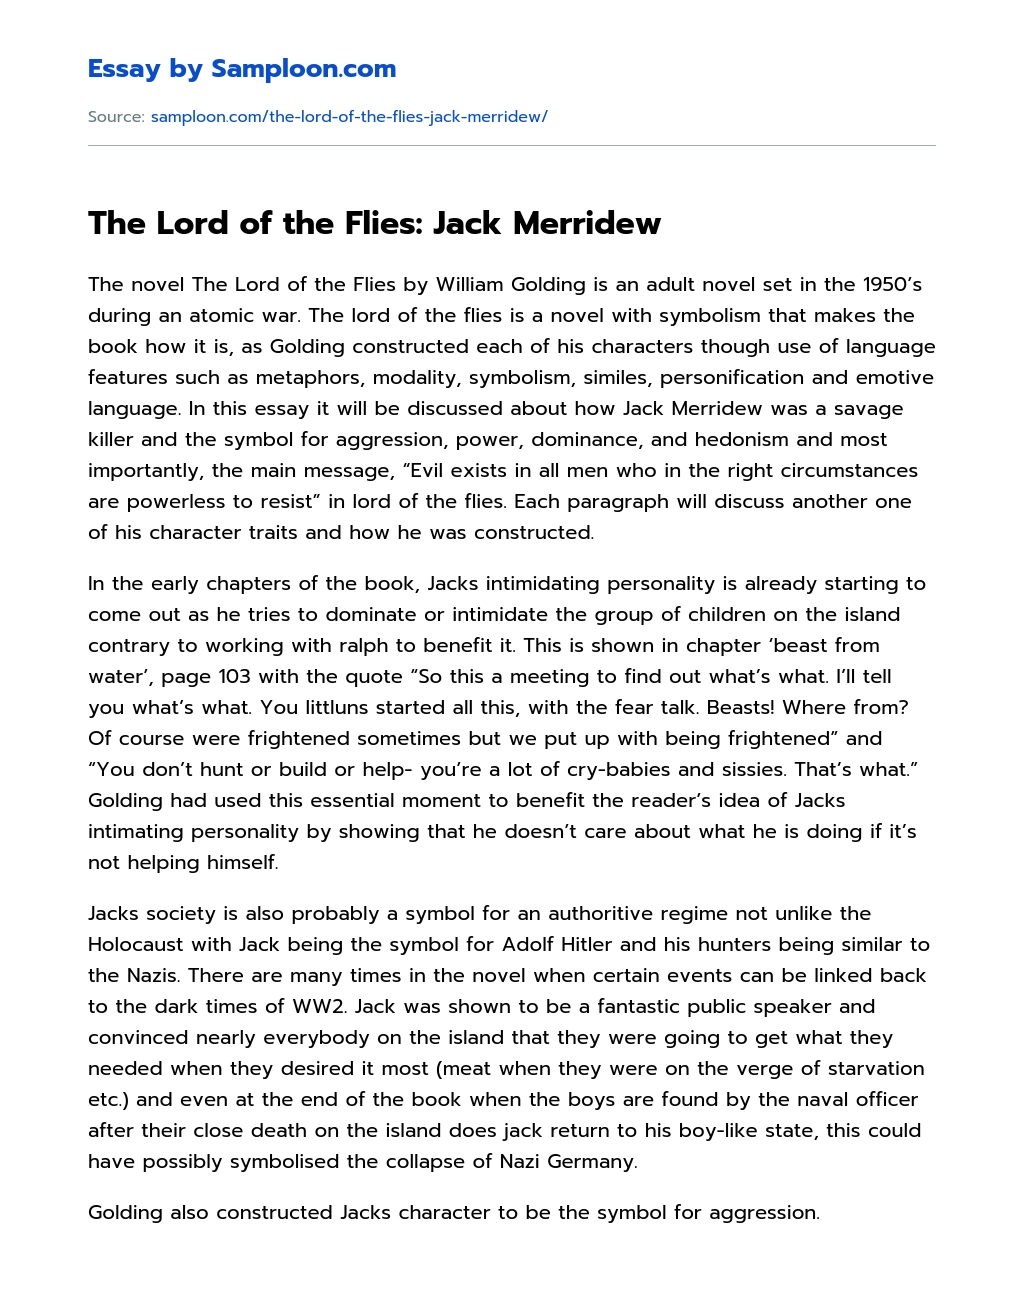 The Lord of the Flies: Jack Merridew Character Analysis essay